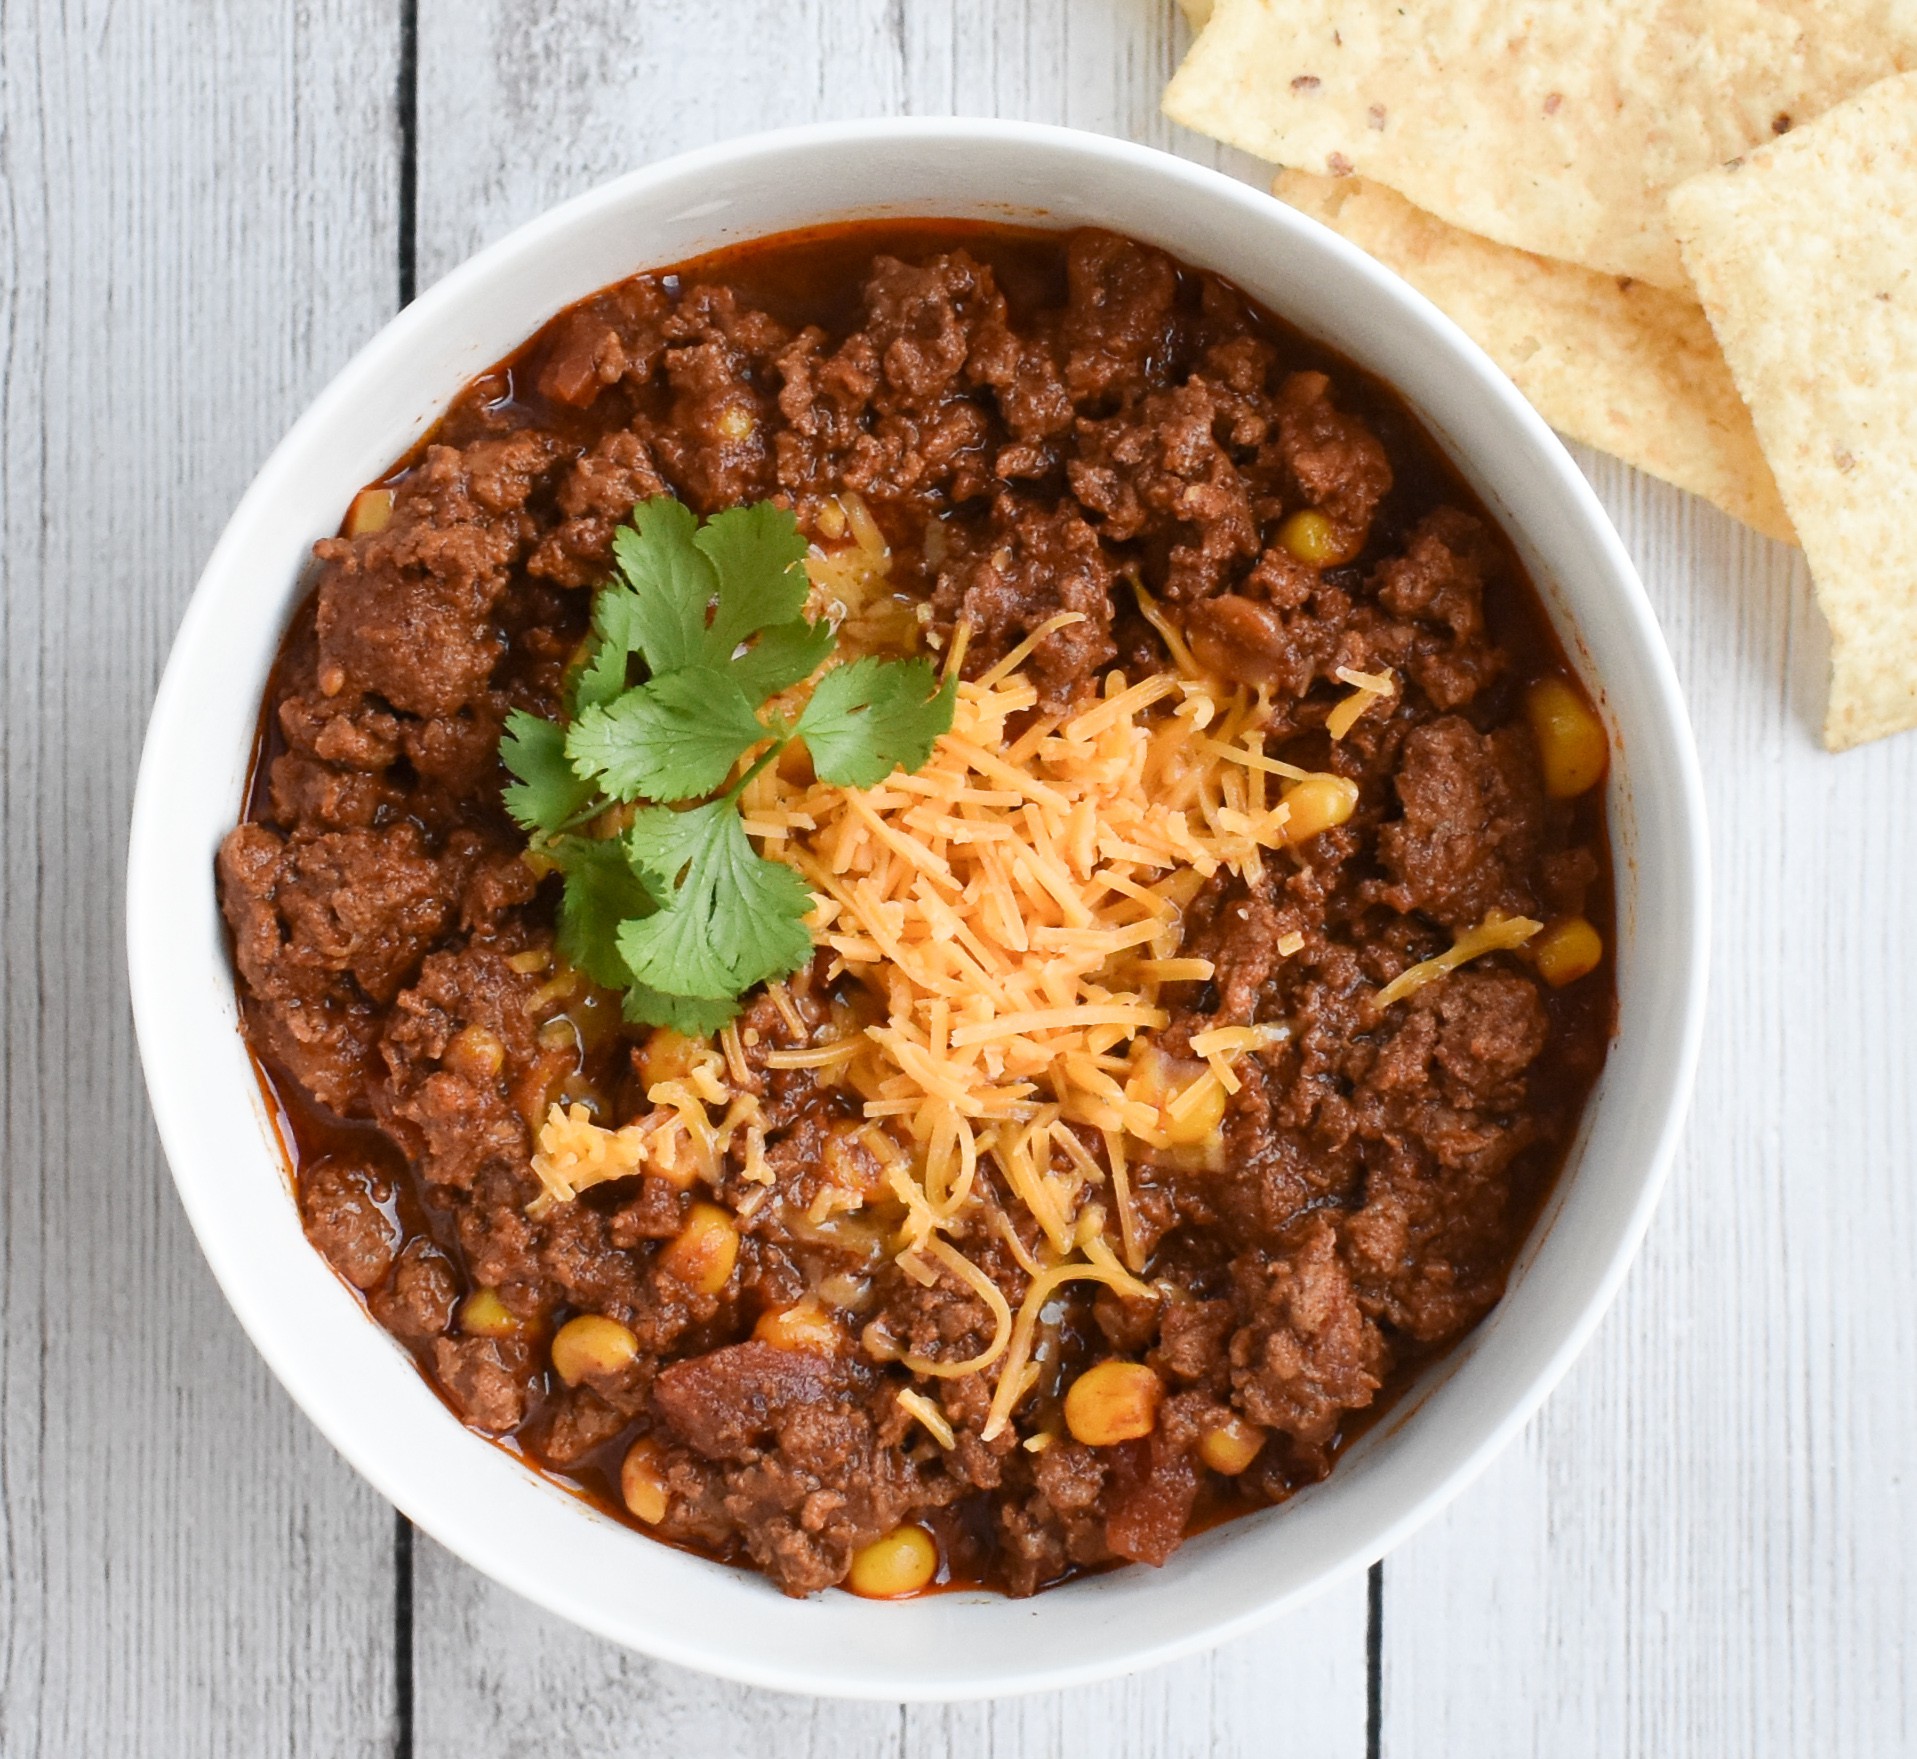 Touchdown Low-Fodmap Chili Recipe Using Slow Cooker; Gluten-Free | Chef ...